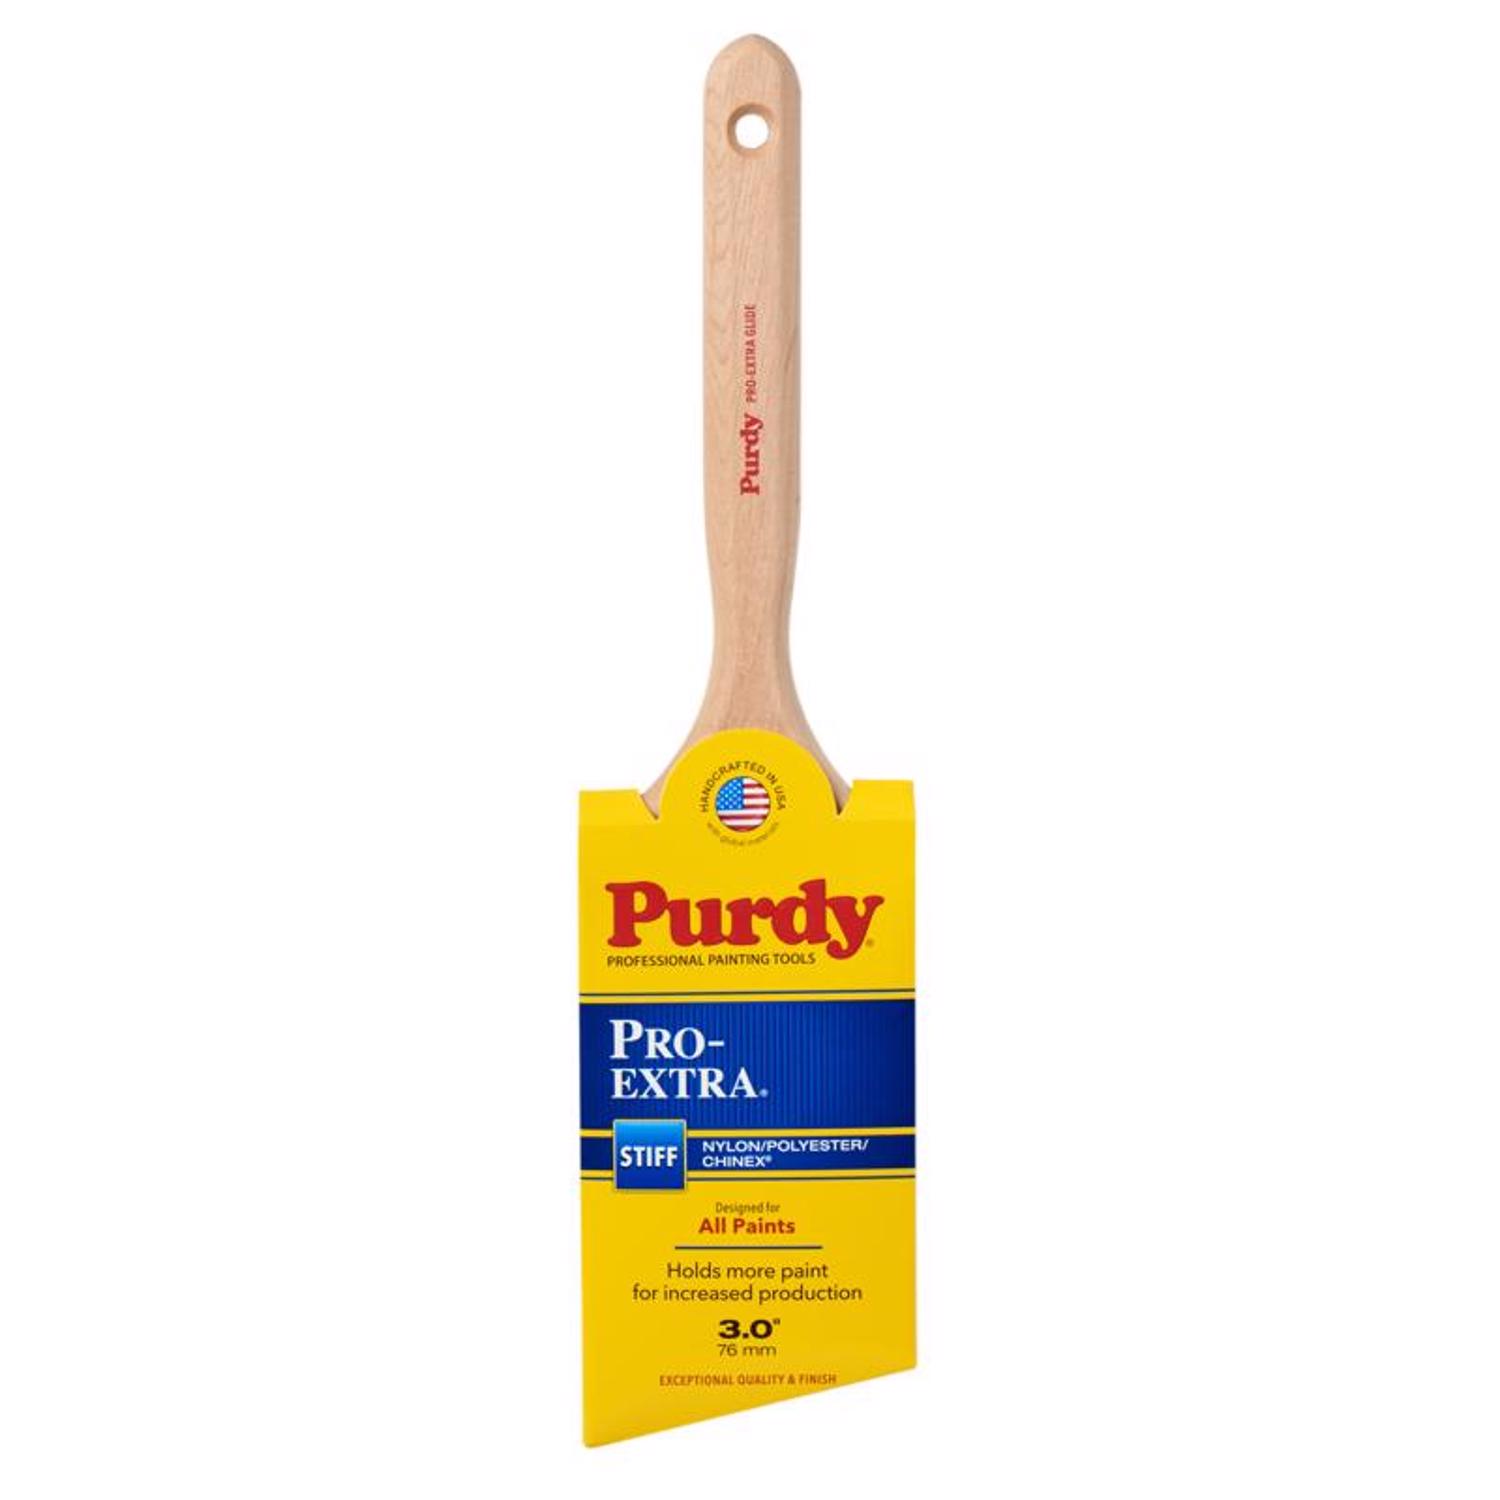 Photos - Putty Knife / Painting Tool Purdy Pro-Extra Glide 3 in. Stiff Angle Trim Paint Brush 144152730